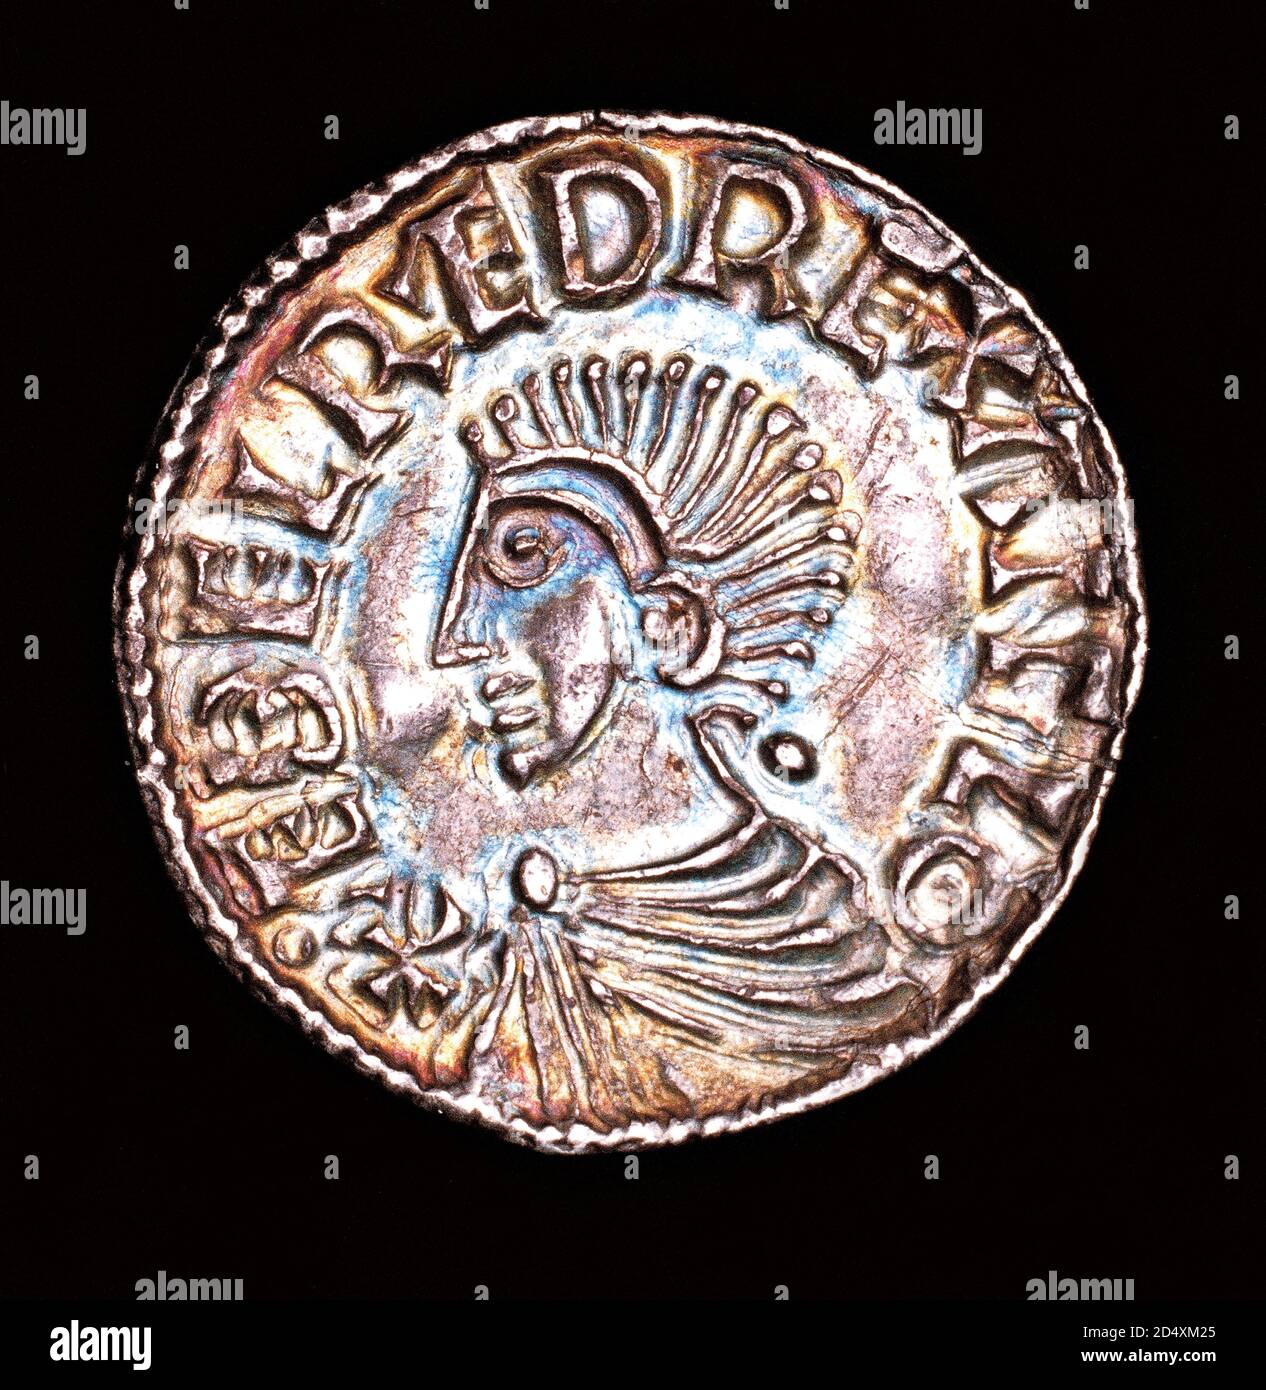 Rare Coin, England Silver Long Cross Penny, Bust of Aethelred, The Unready, 978 d.C. Foto Stock